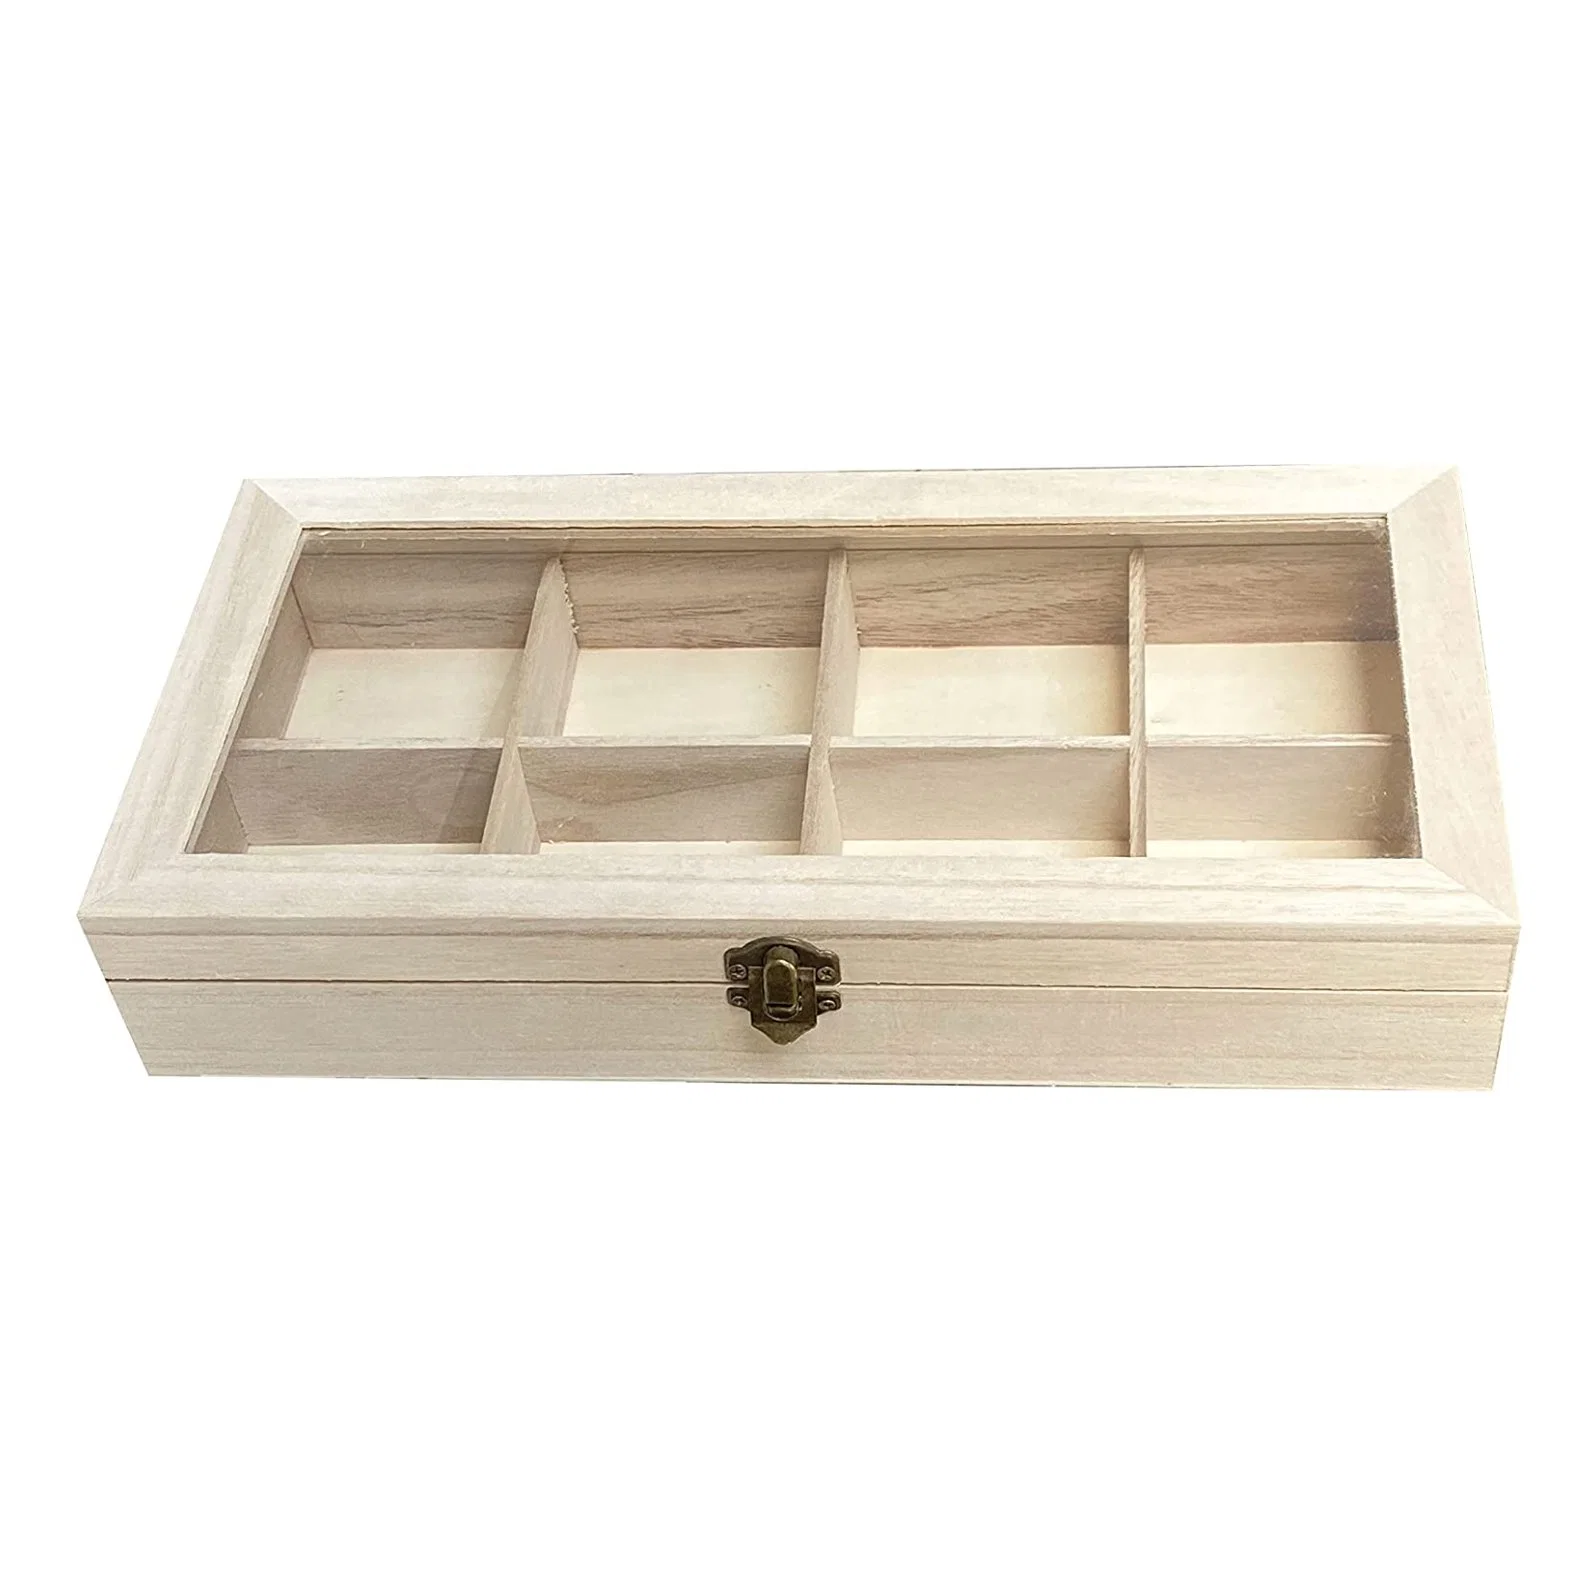 8 Grid Unfinished Wooden Box Necklace Ring Earring Box Jewelry Display Organizer